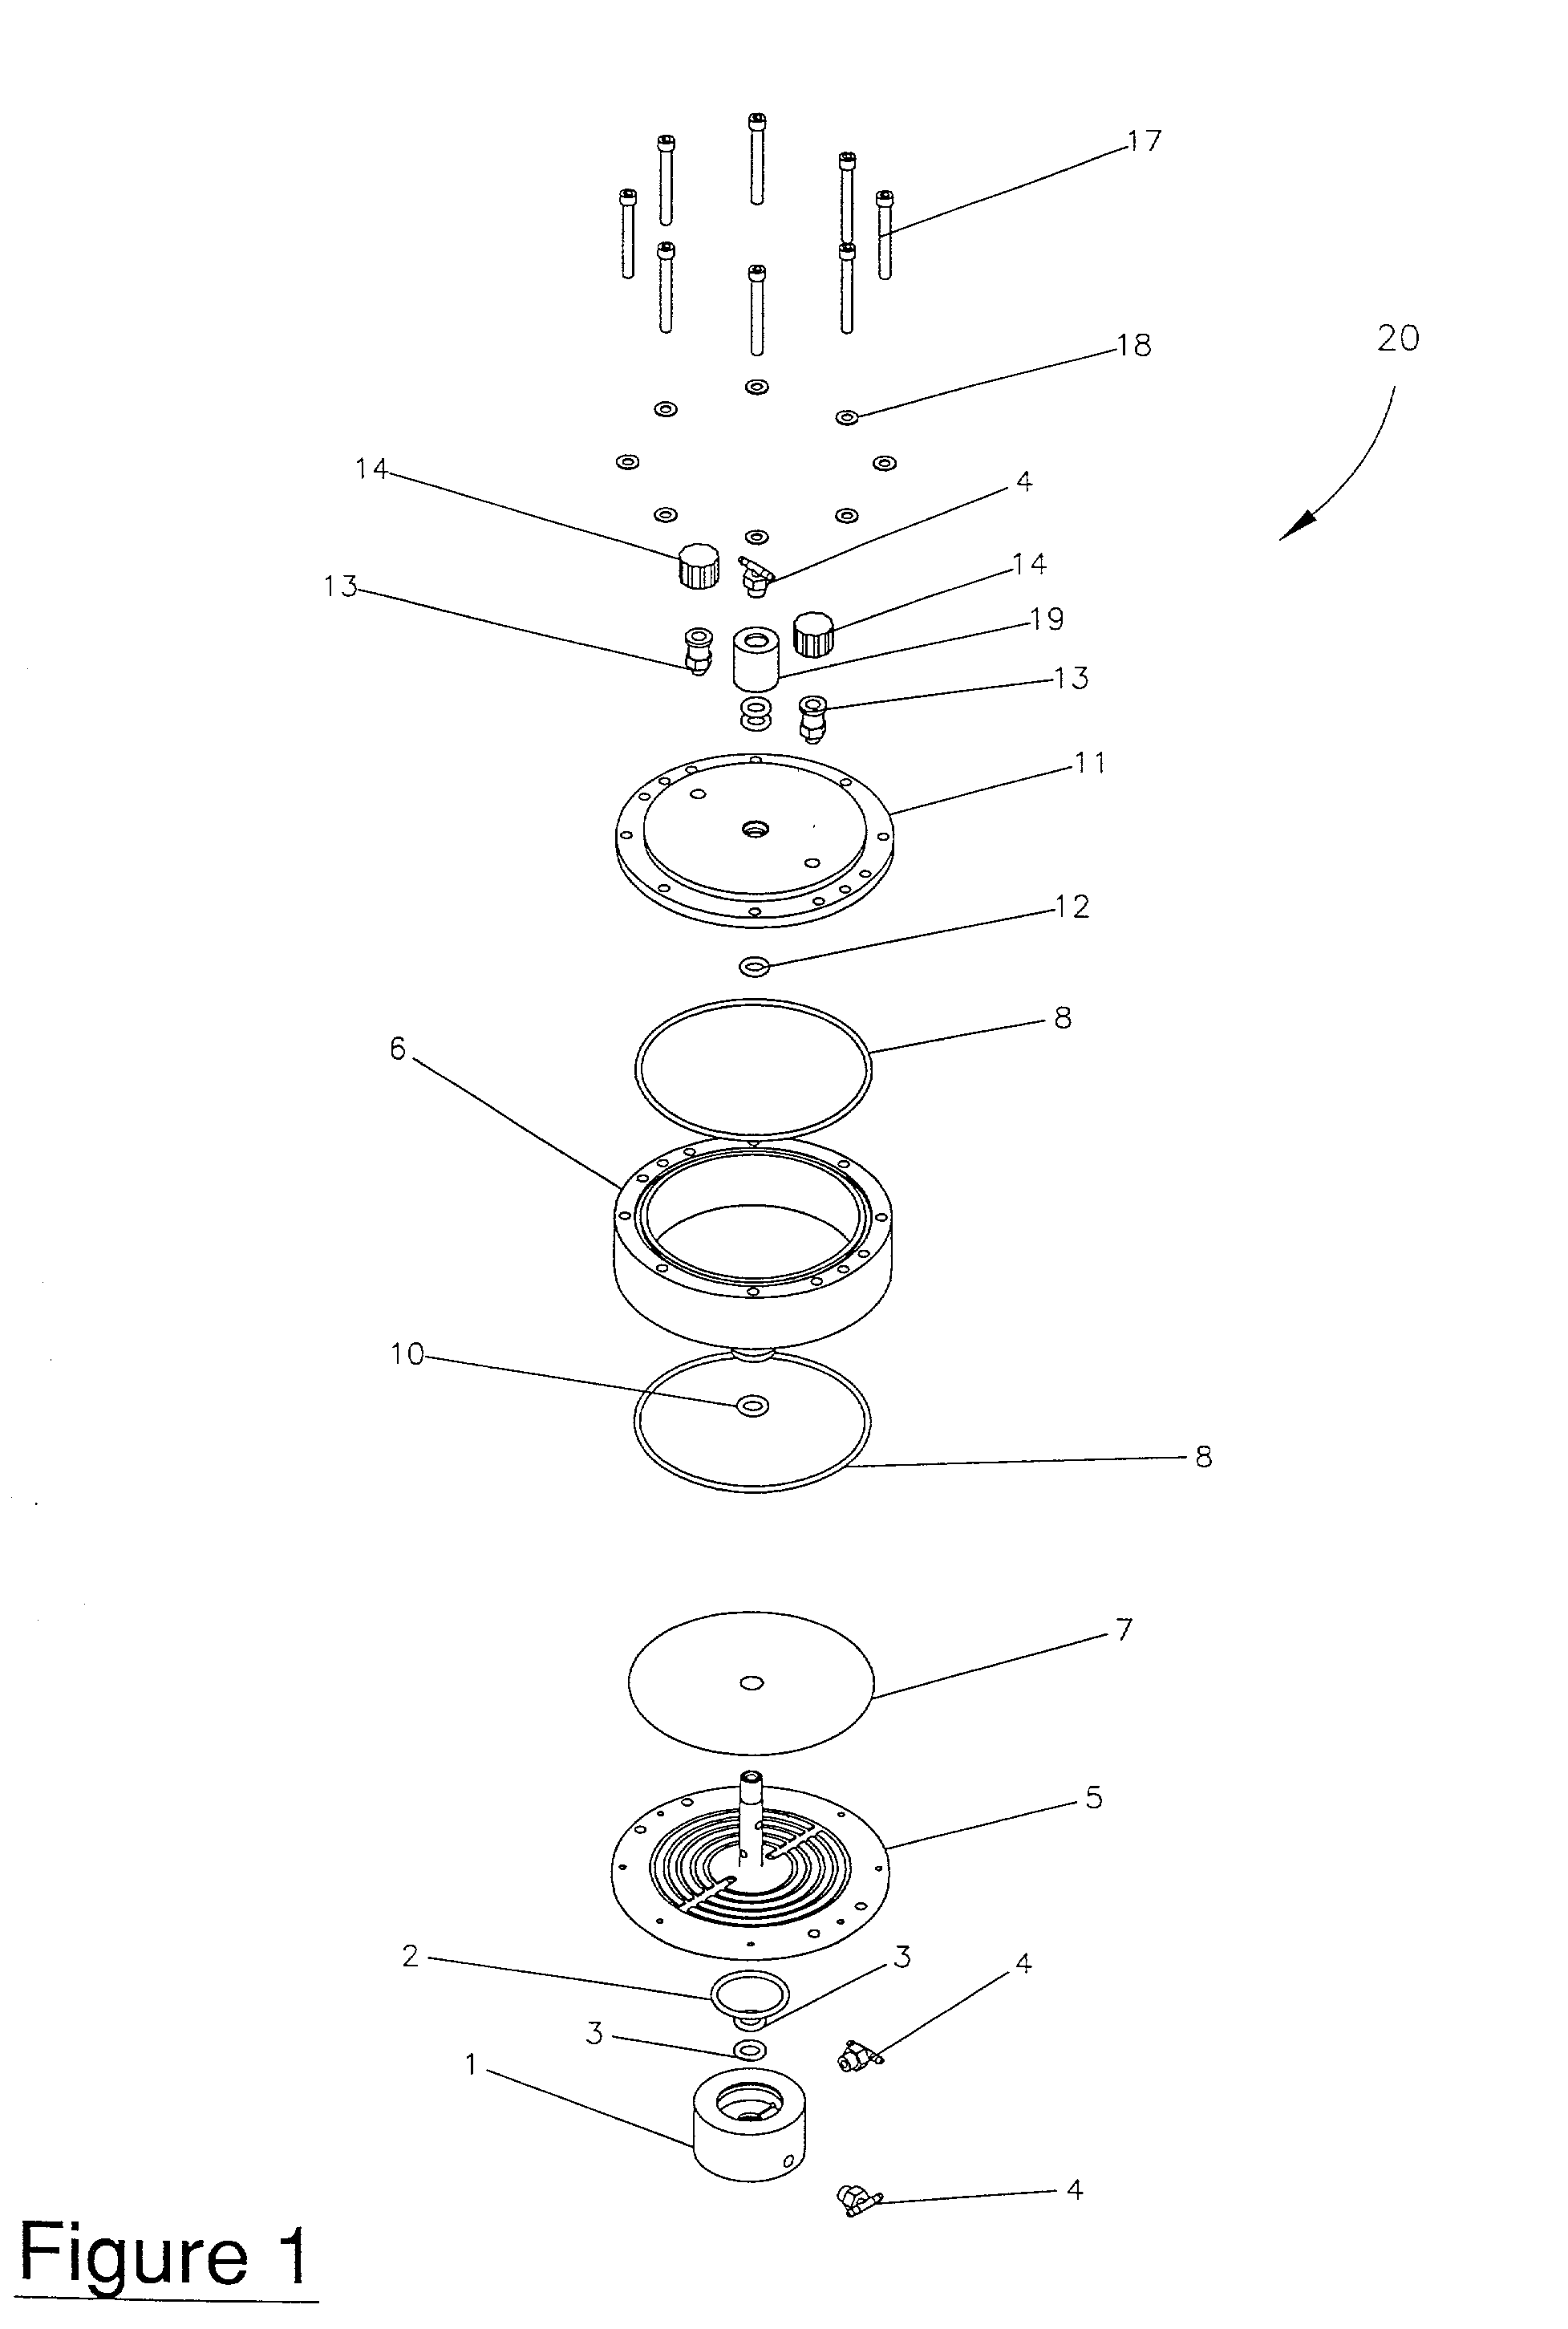 Bioreactor apparatus and cell culturing system